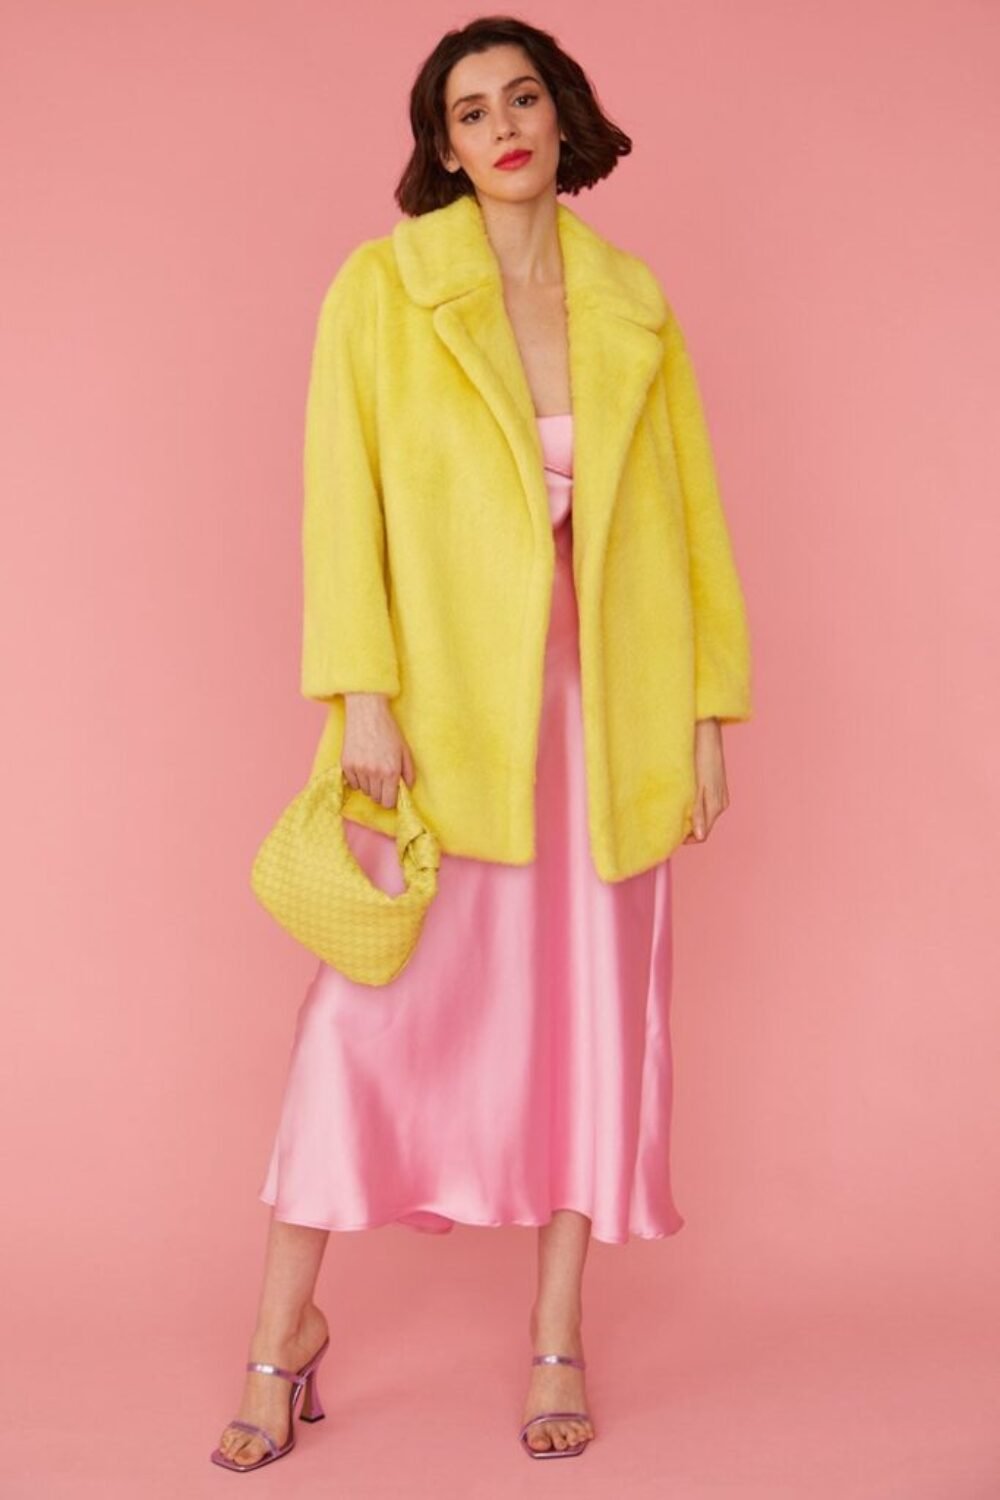 Shop Lux Yellow Faux Fur Short Coat and women's luxury and designer clothes at www.lux-apparel.co.uk